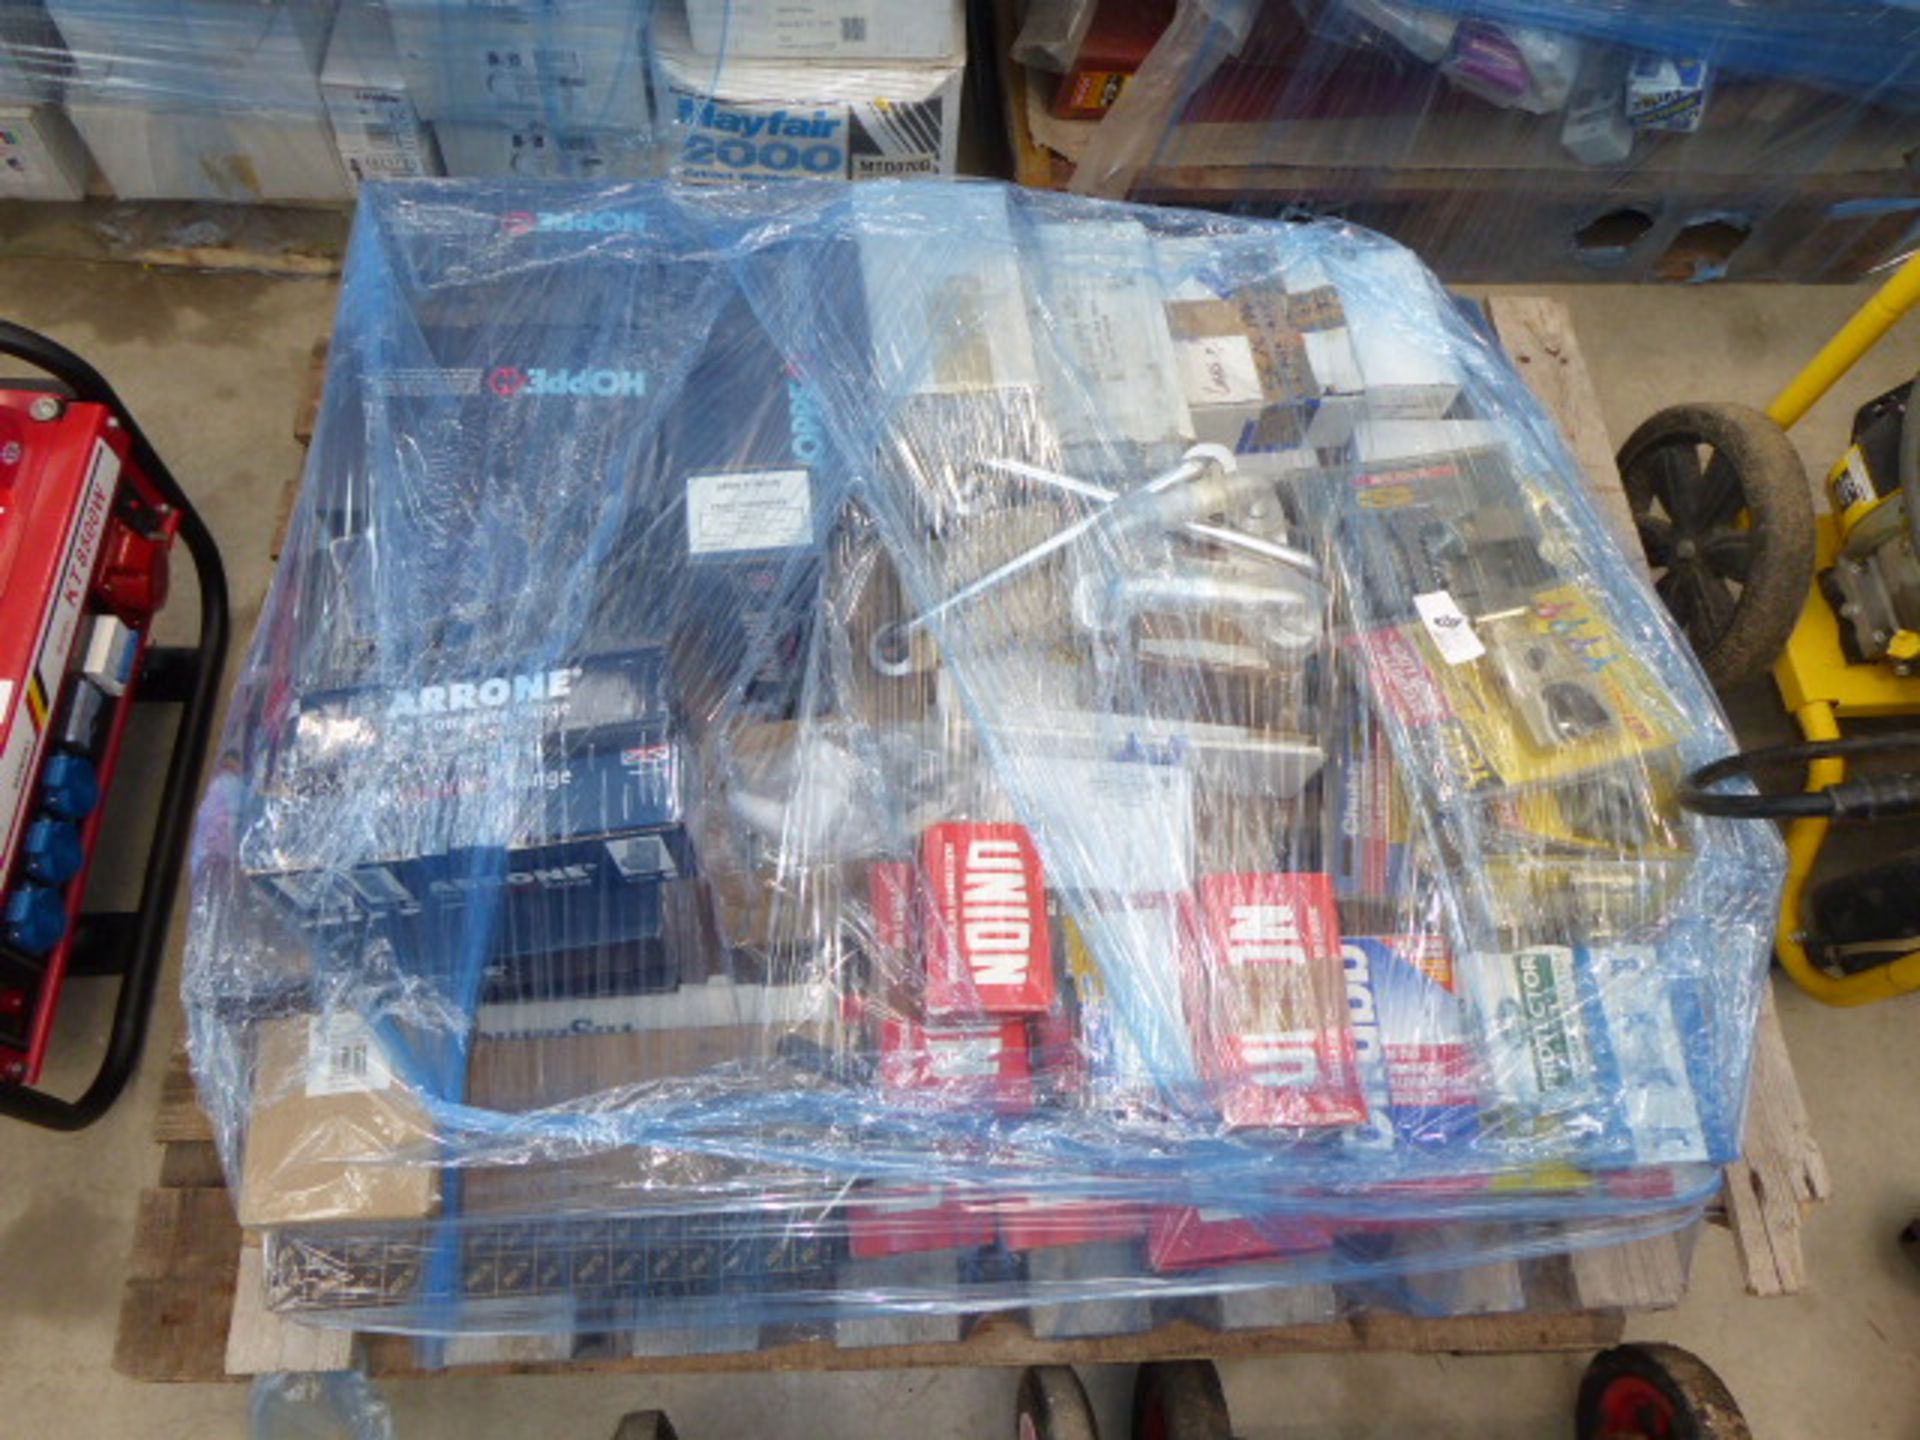 Pallet containing a large quantity of locks including security door locks, Yale locks, door